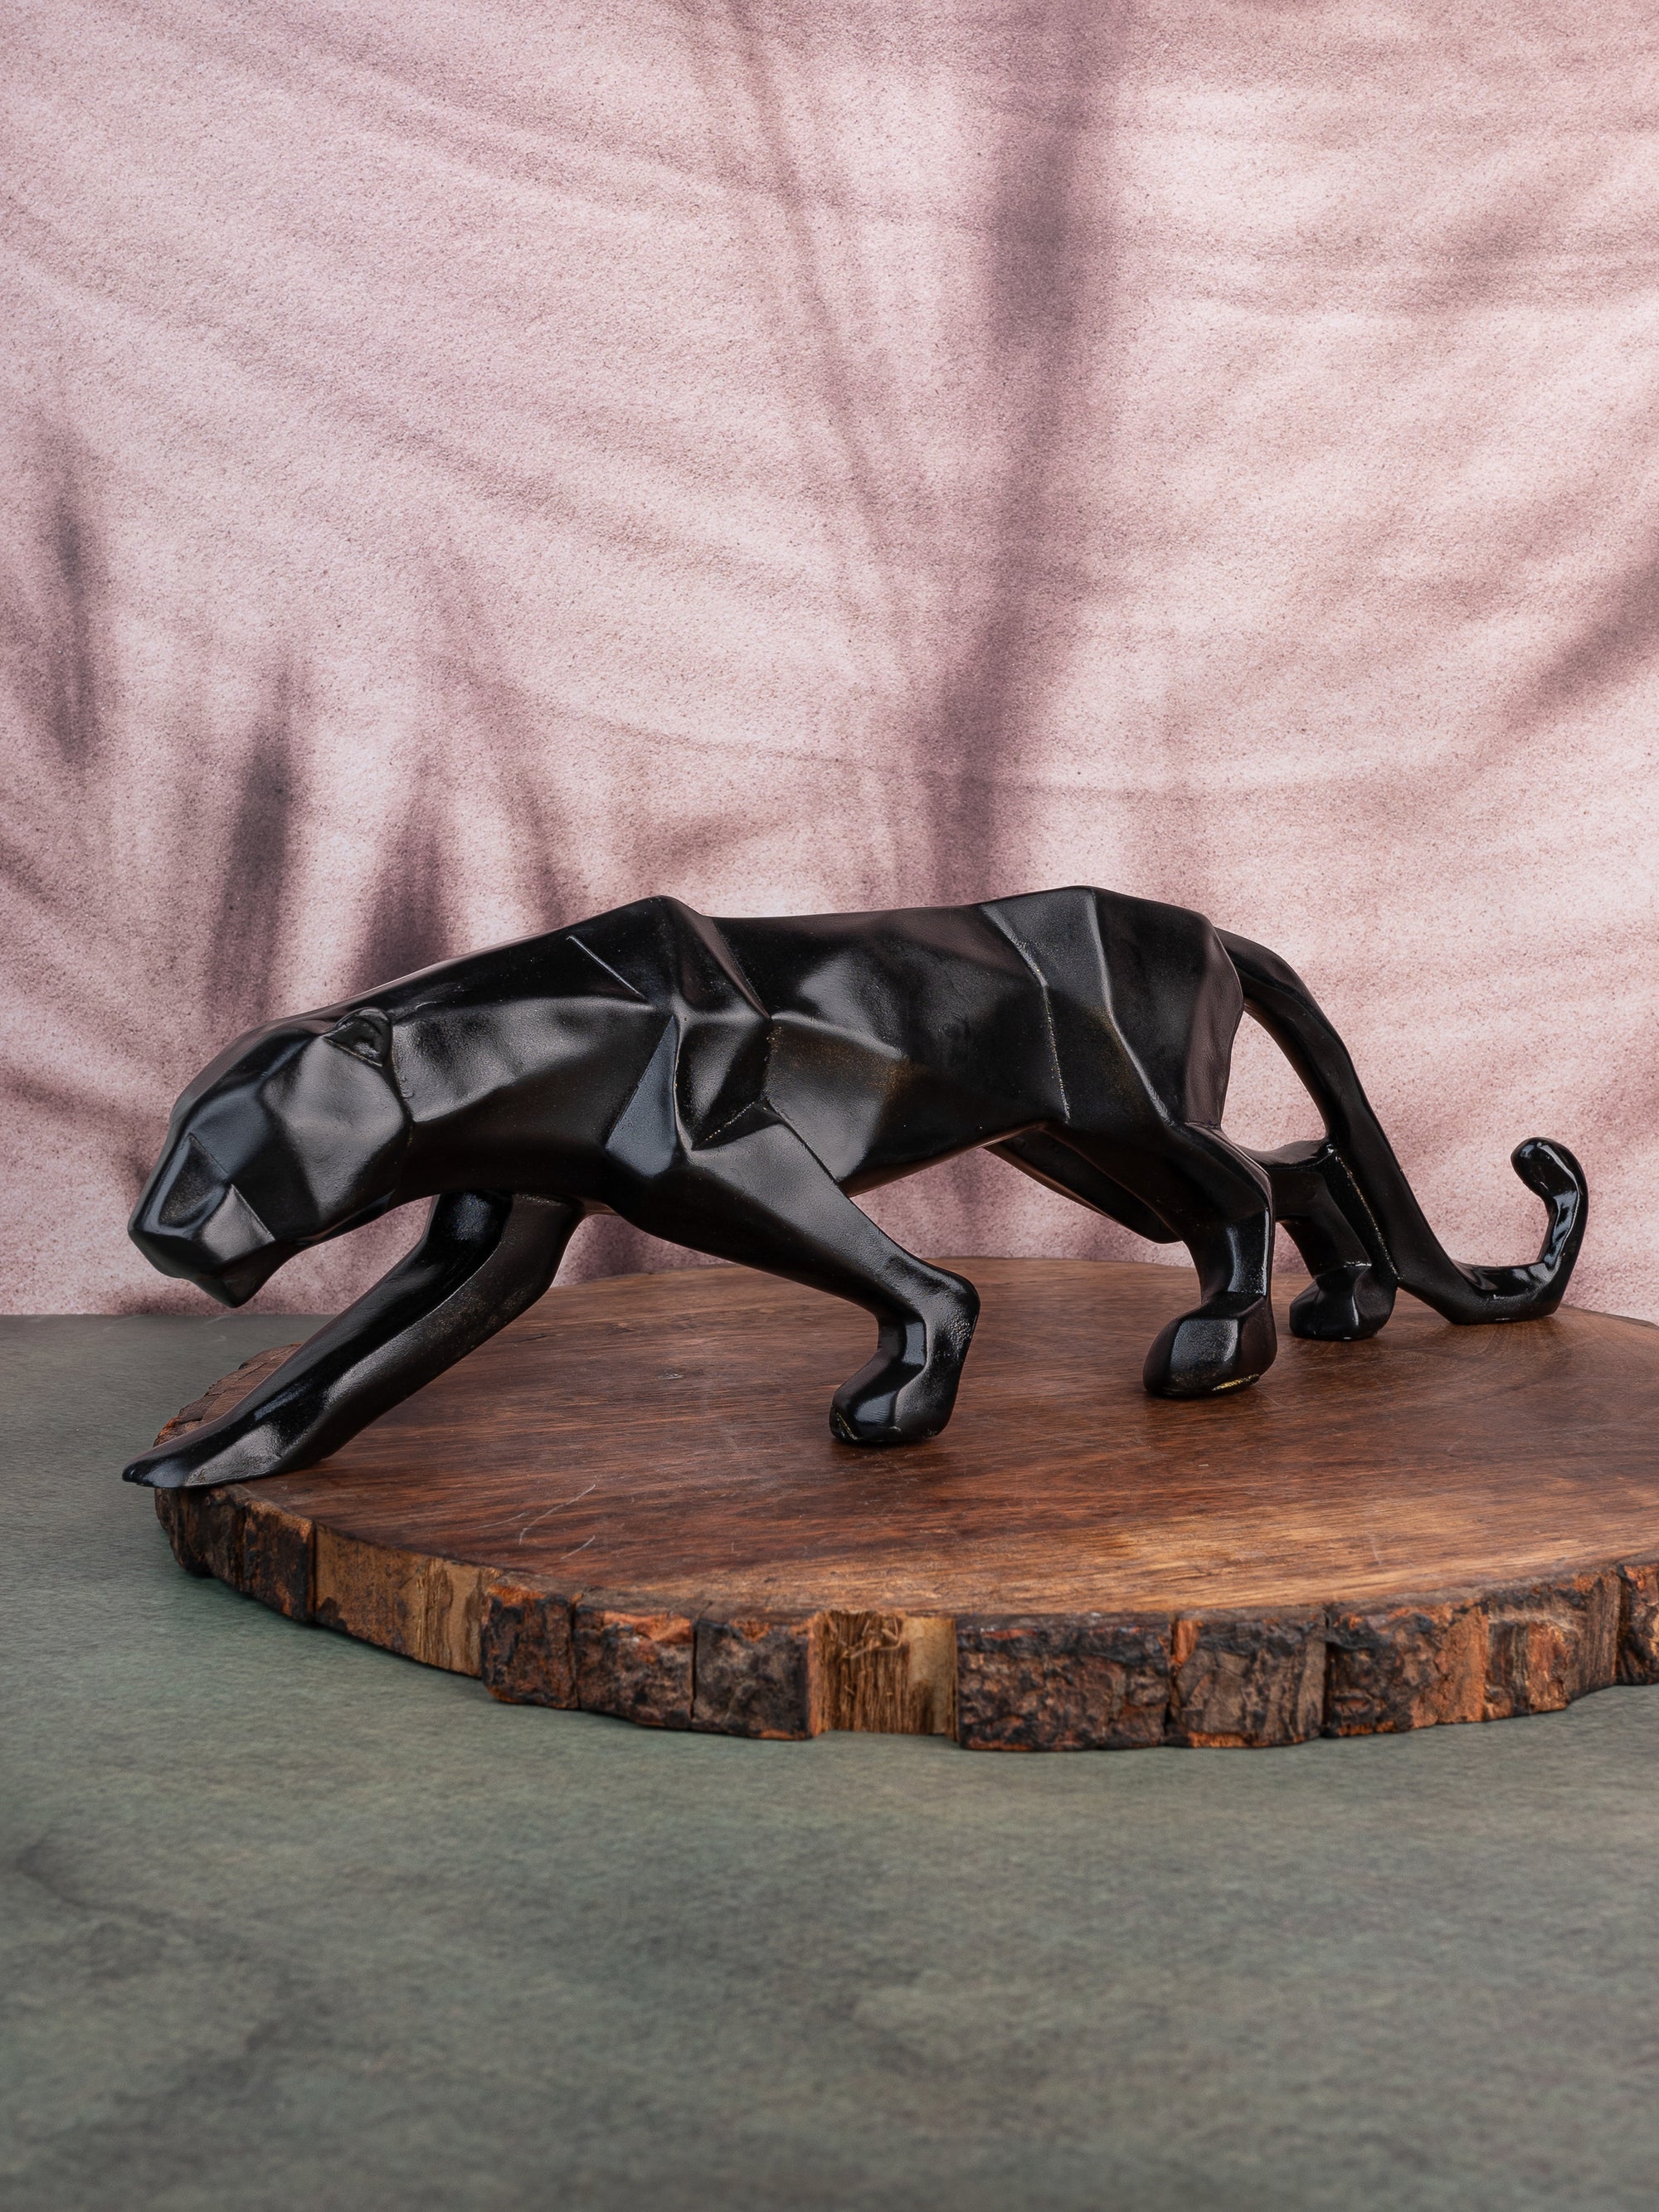 Geometric Design Black Panther Decorative Showpiece Crafted from Resin - 15 inches